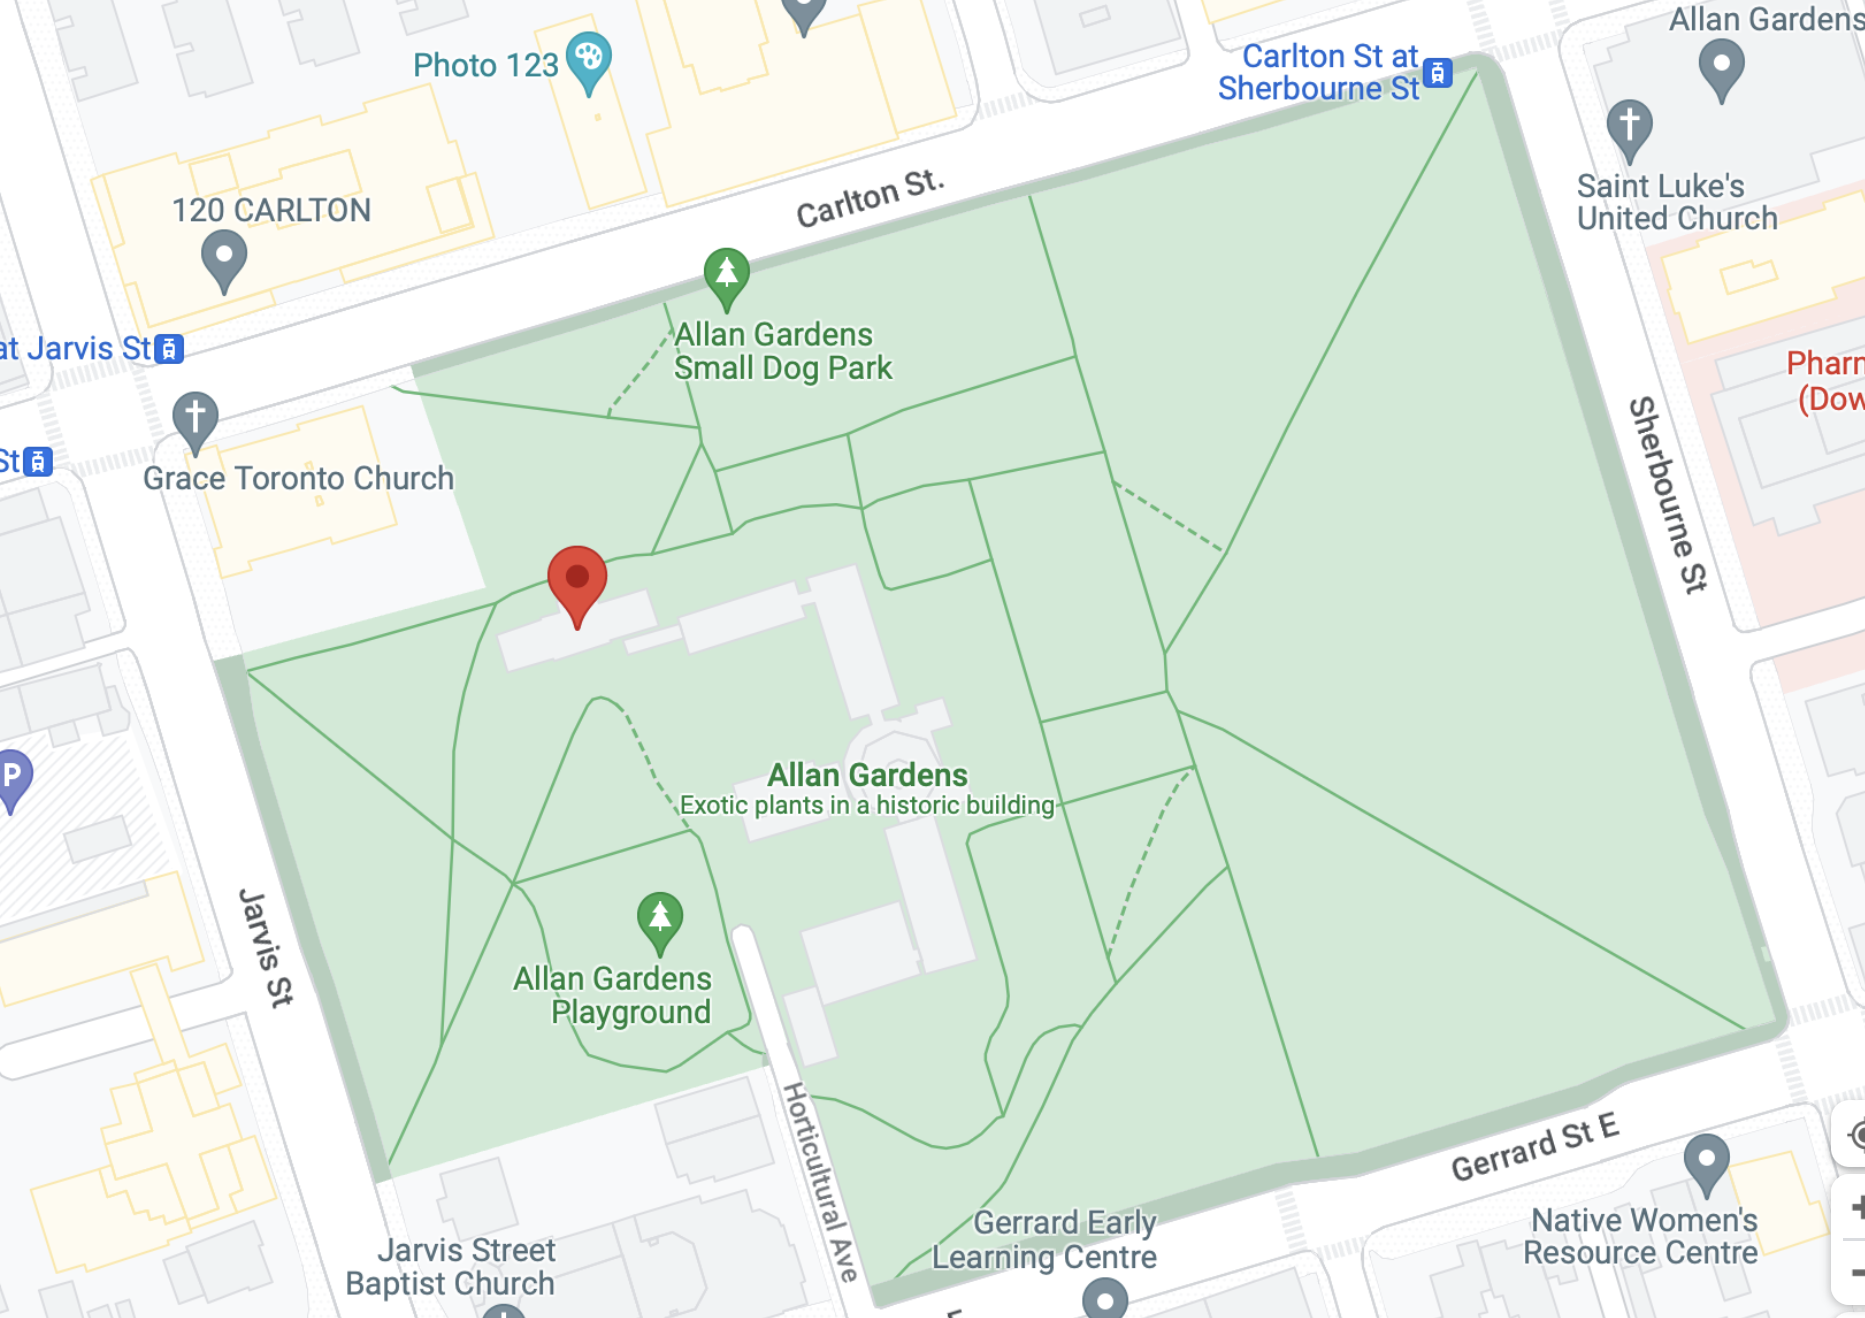 Image of a map of Allan Gardens, showing the location of the Children's Conservatory with a red pin.